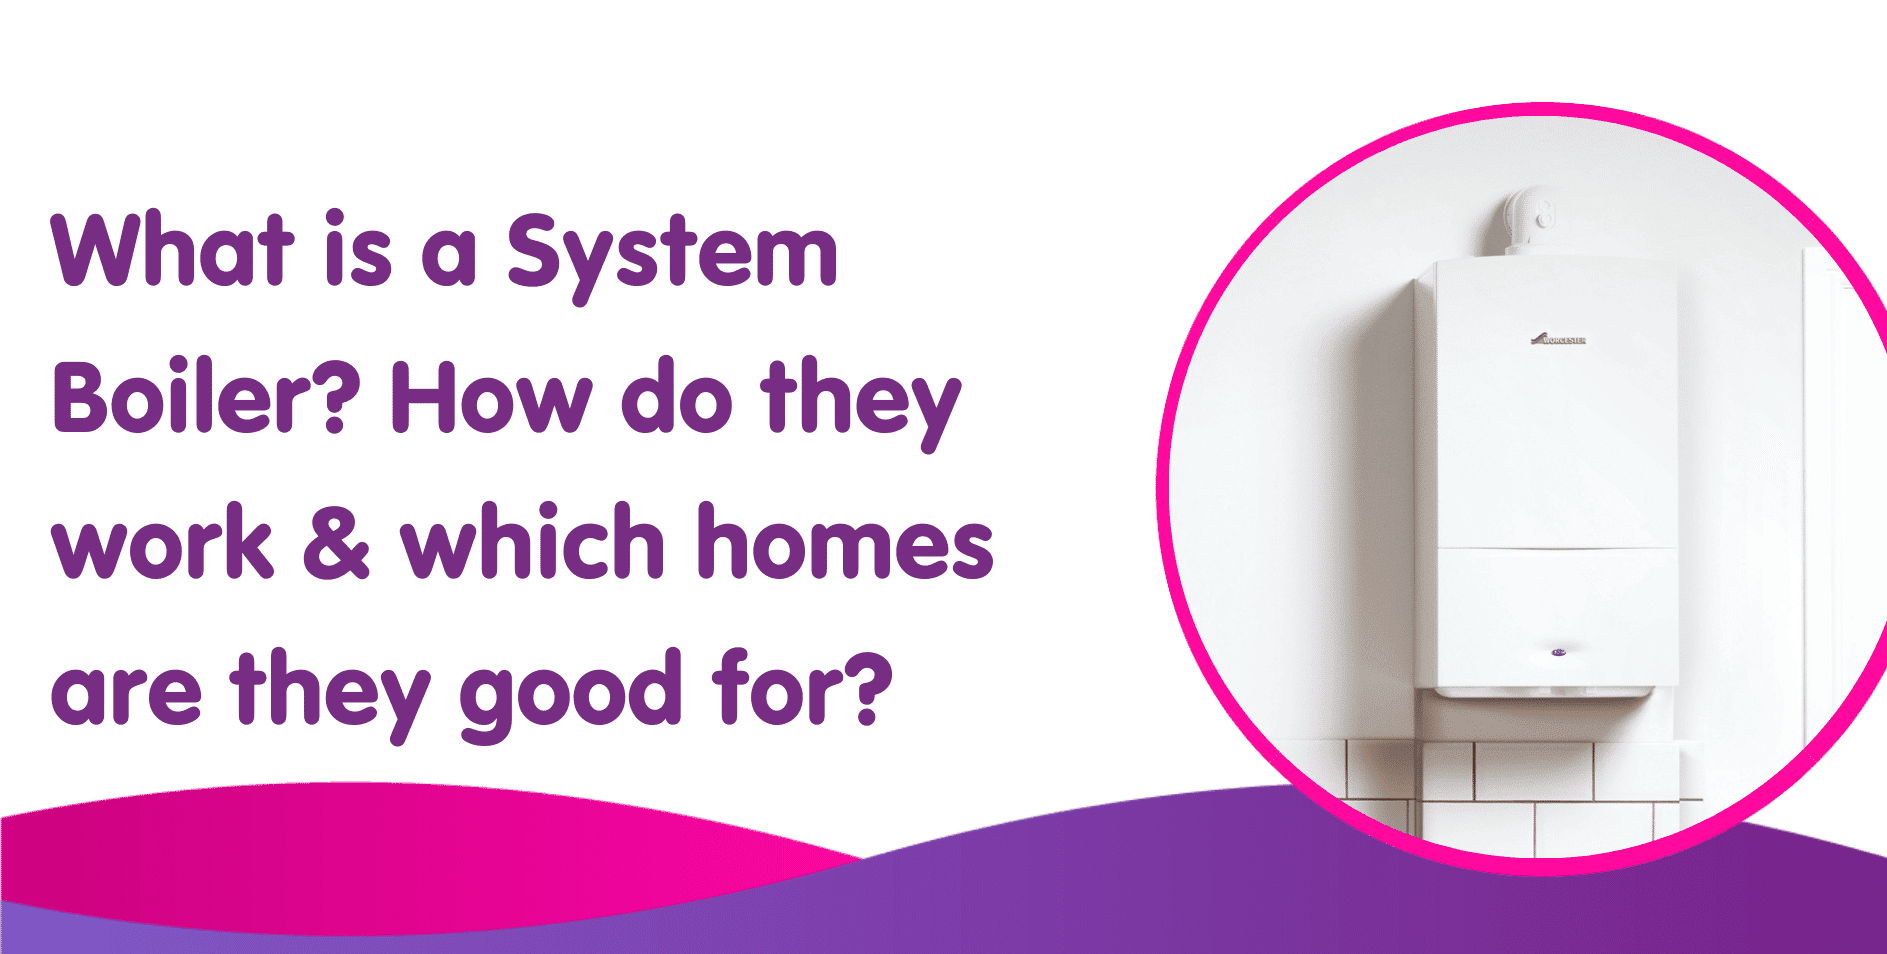 What is a System Boiler? How do they work and are they good?